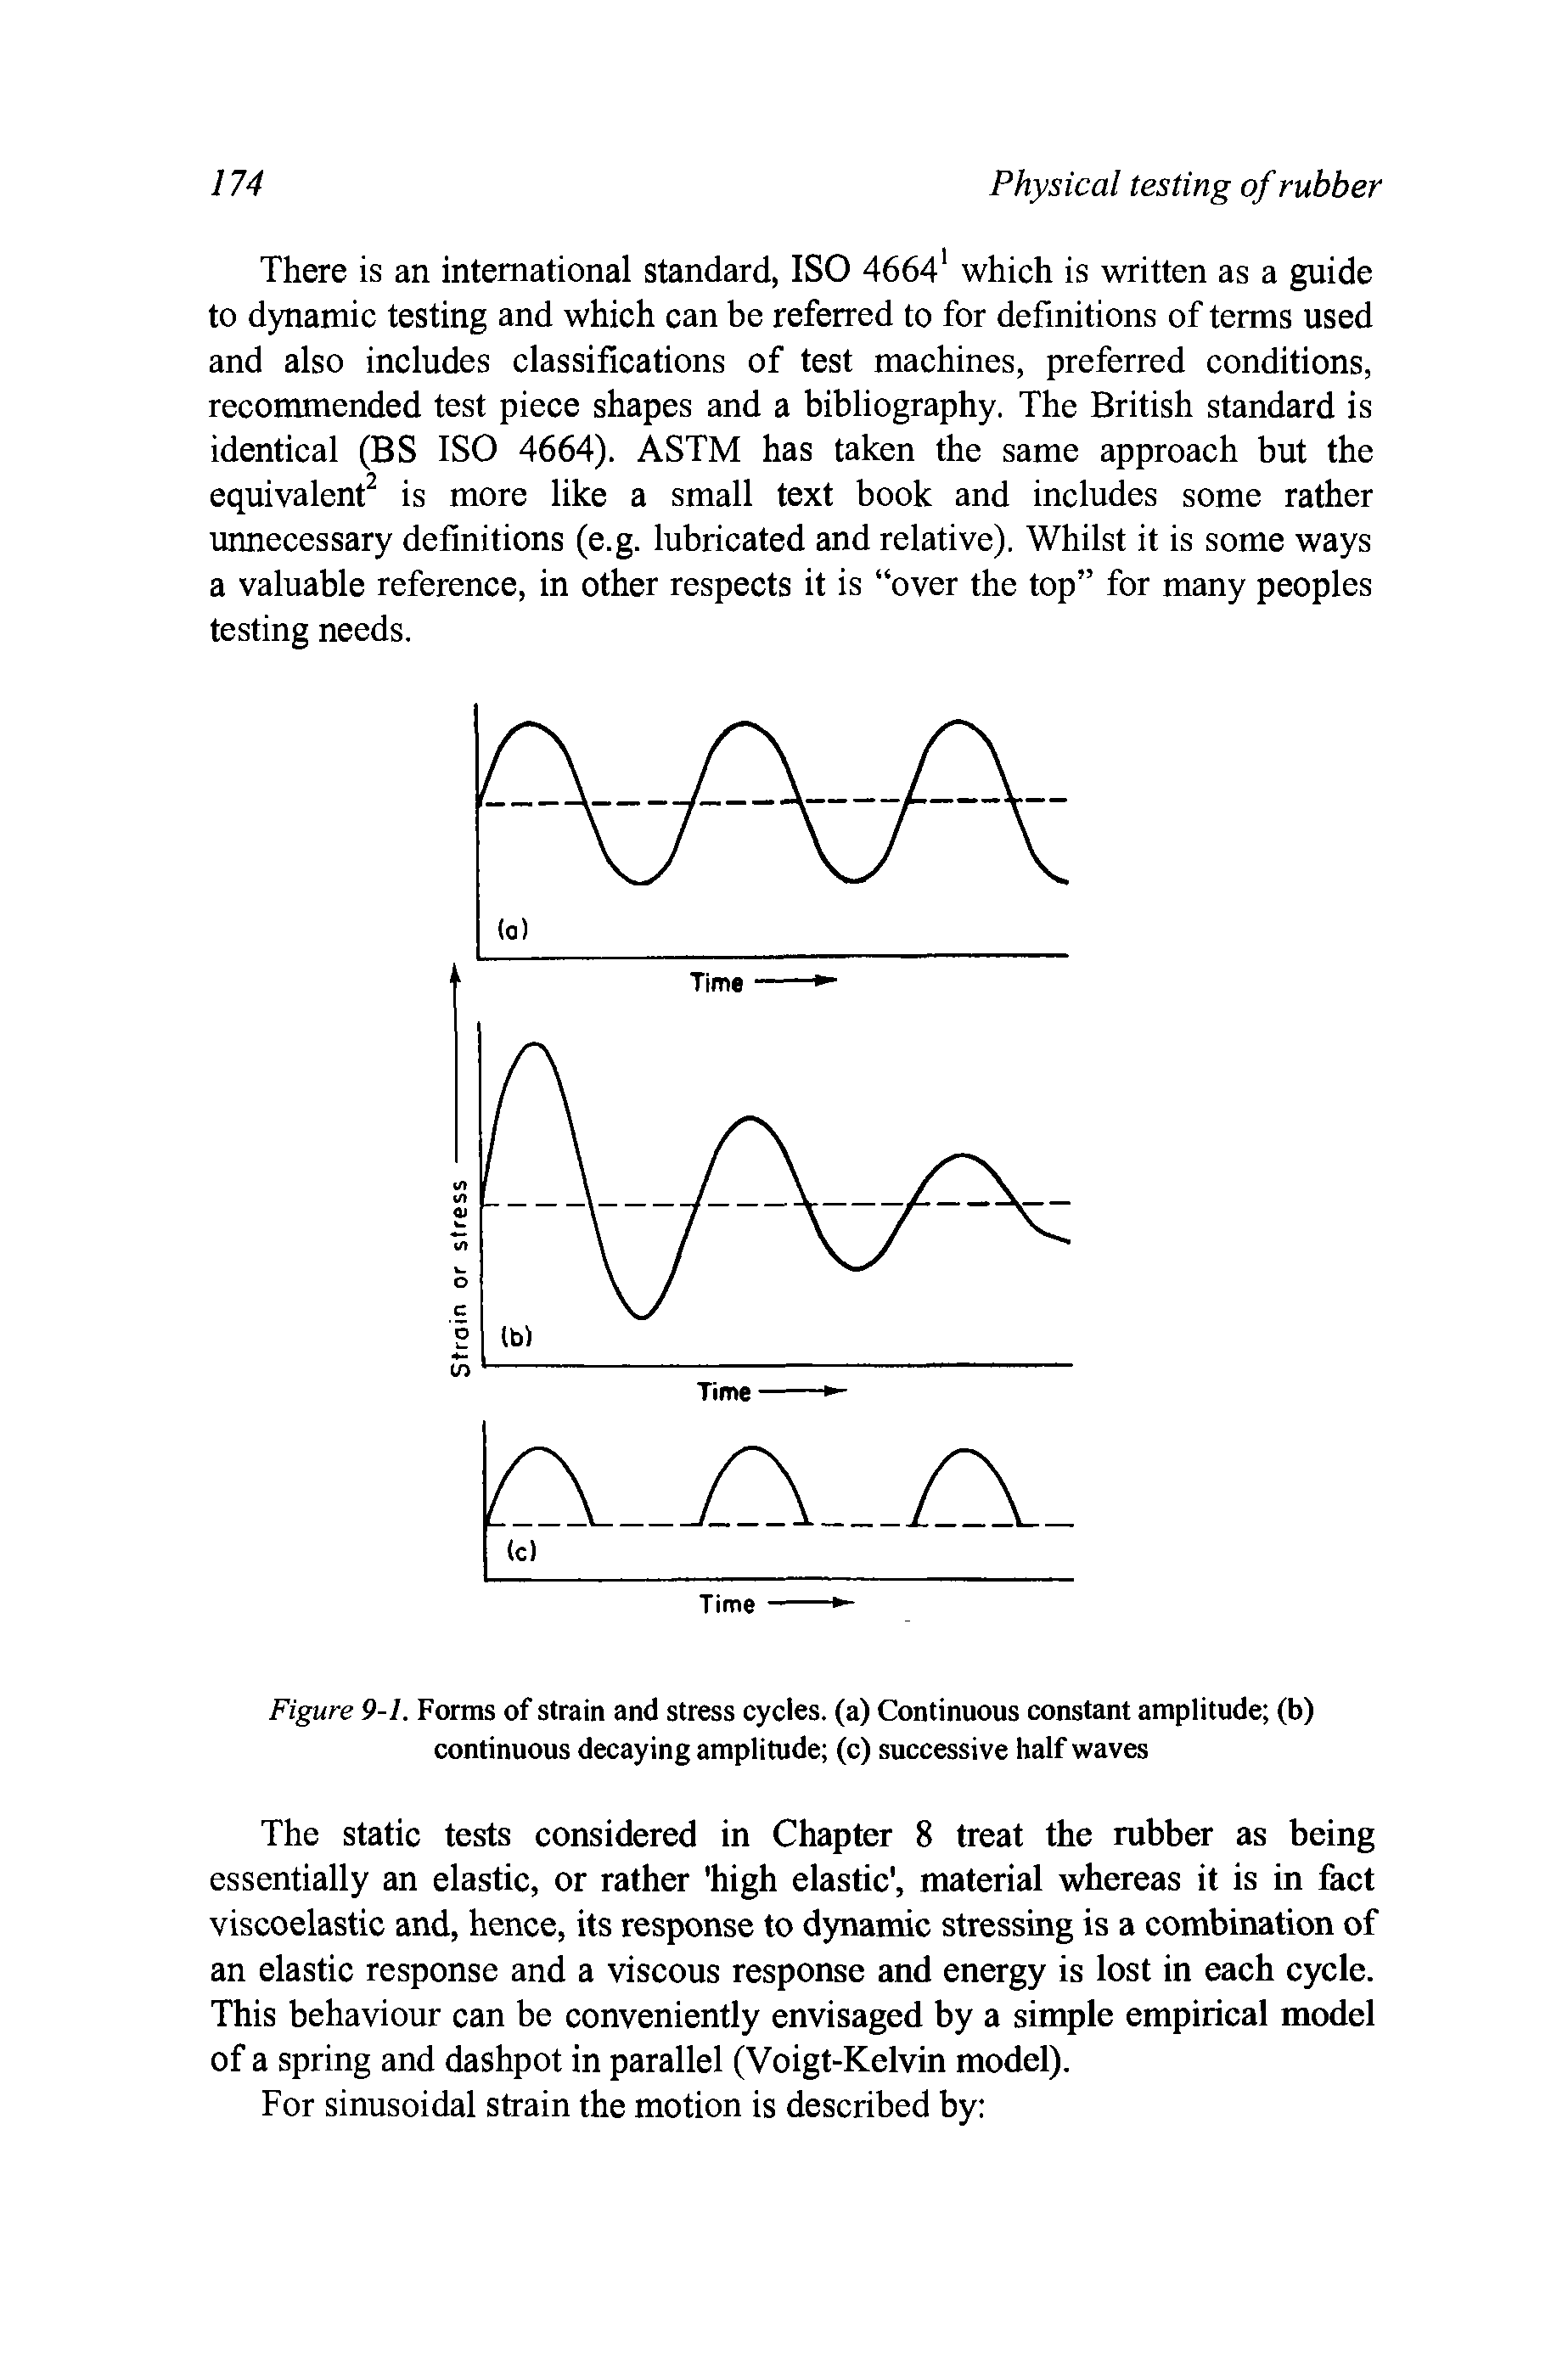 Figure 9-1. Forms of strain and stress cycles, (a) Continuous constant amplitude (b) continuous decaying amplitude (c) successive half waves...